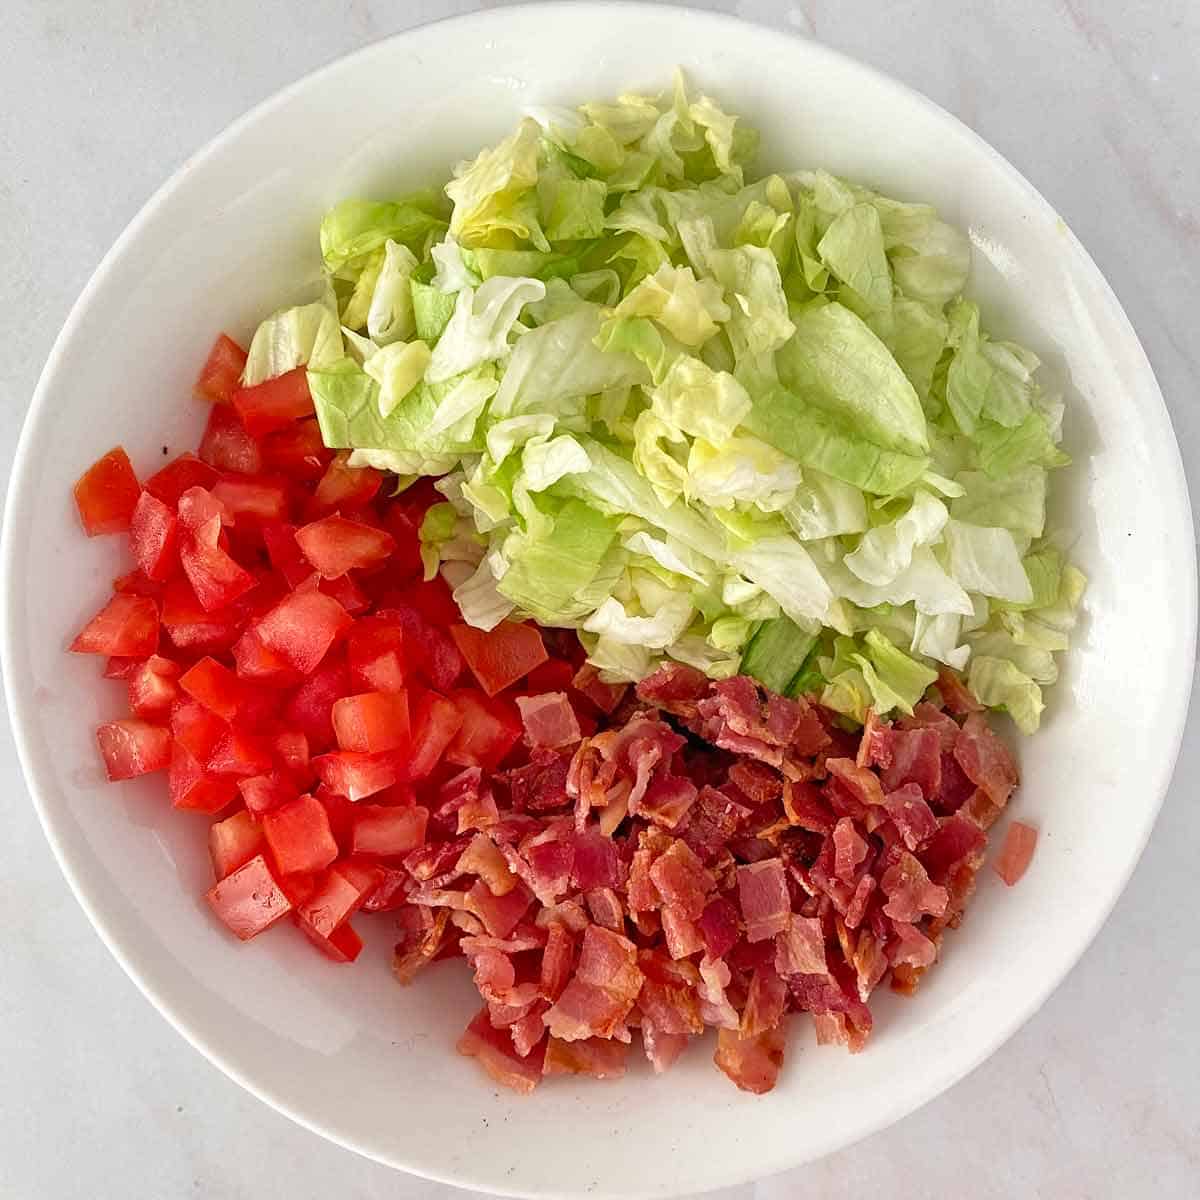 Chopped bacon, lettuce and tomato in a white bowl.